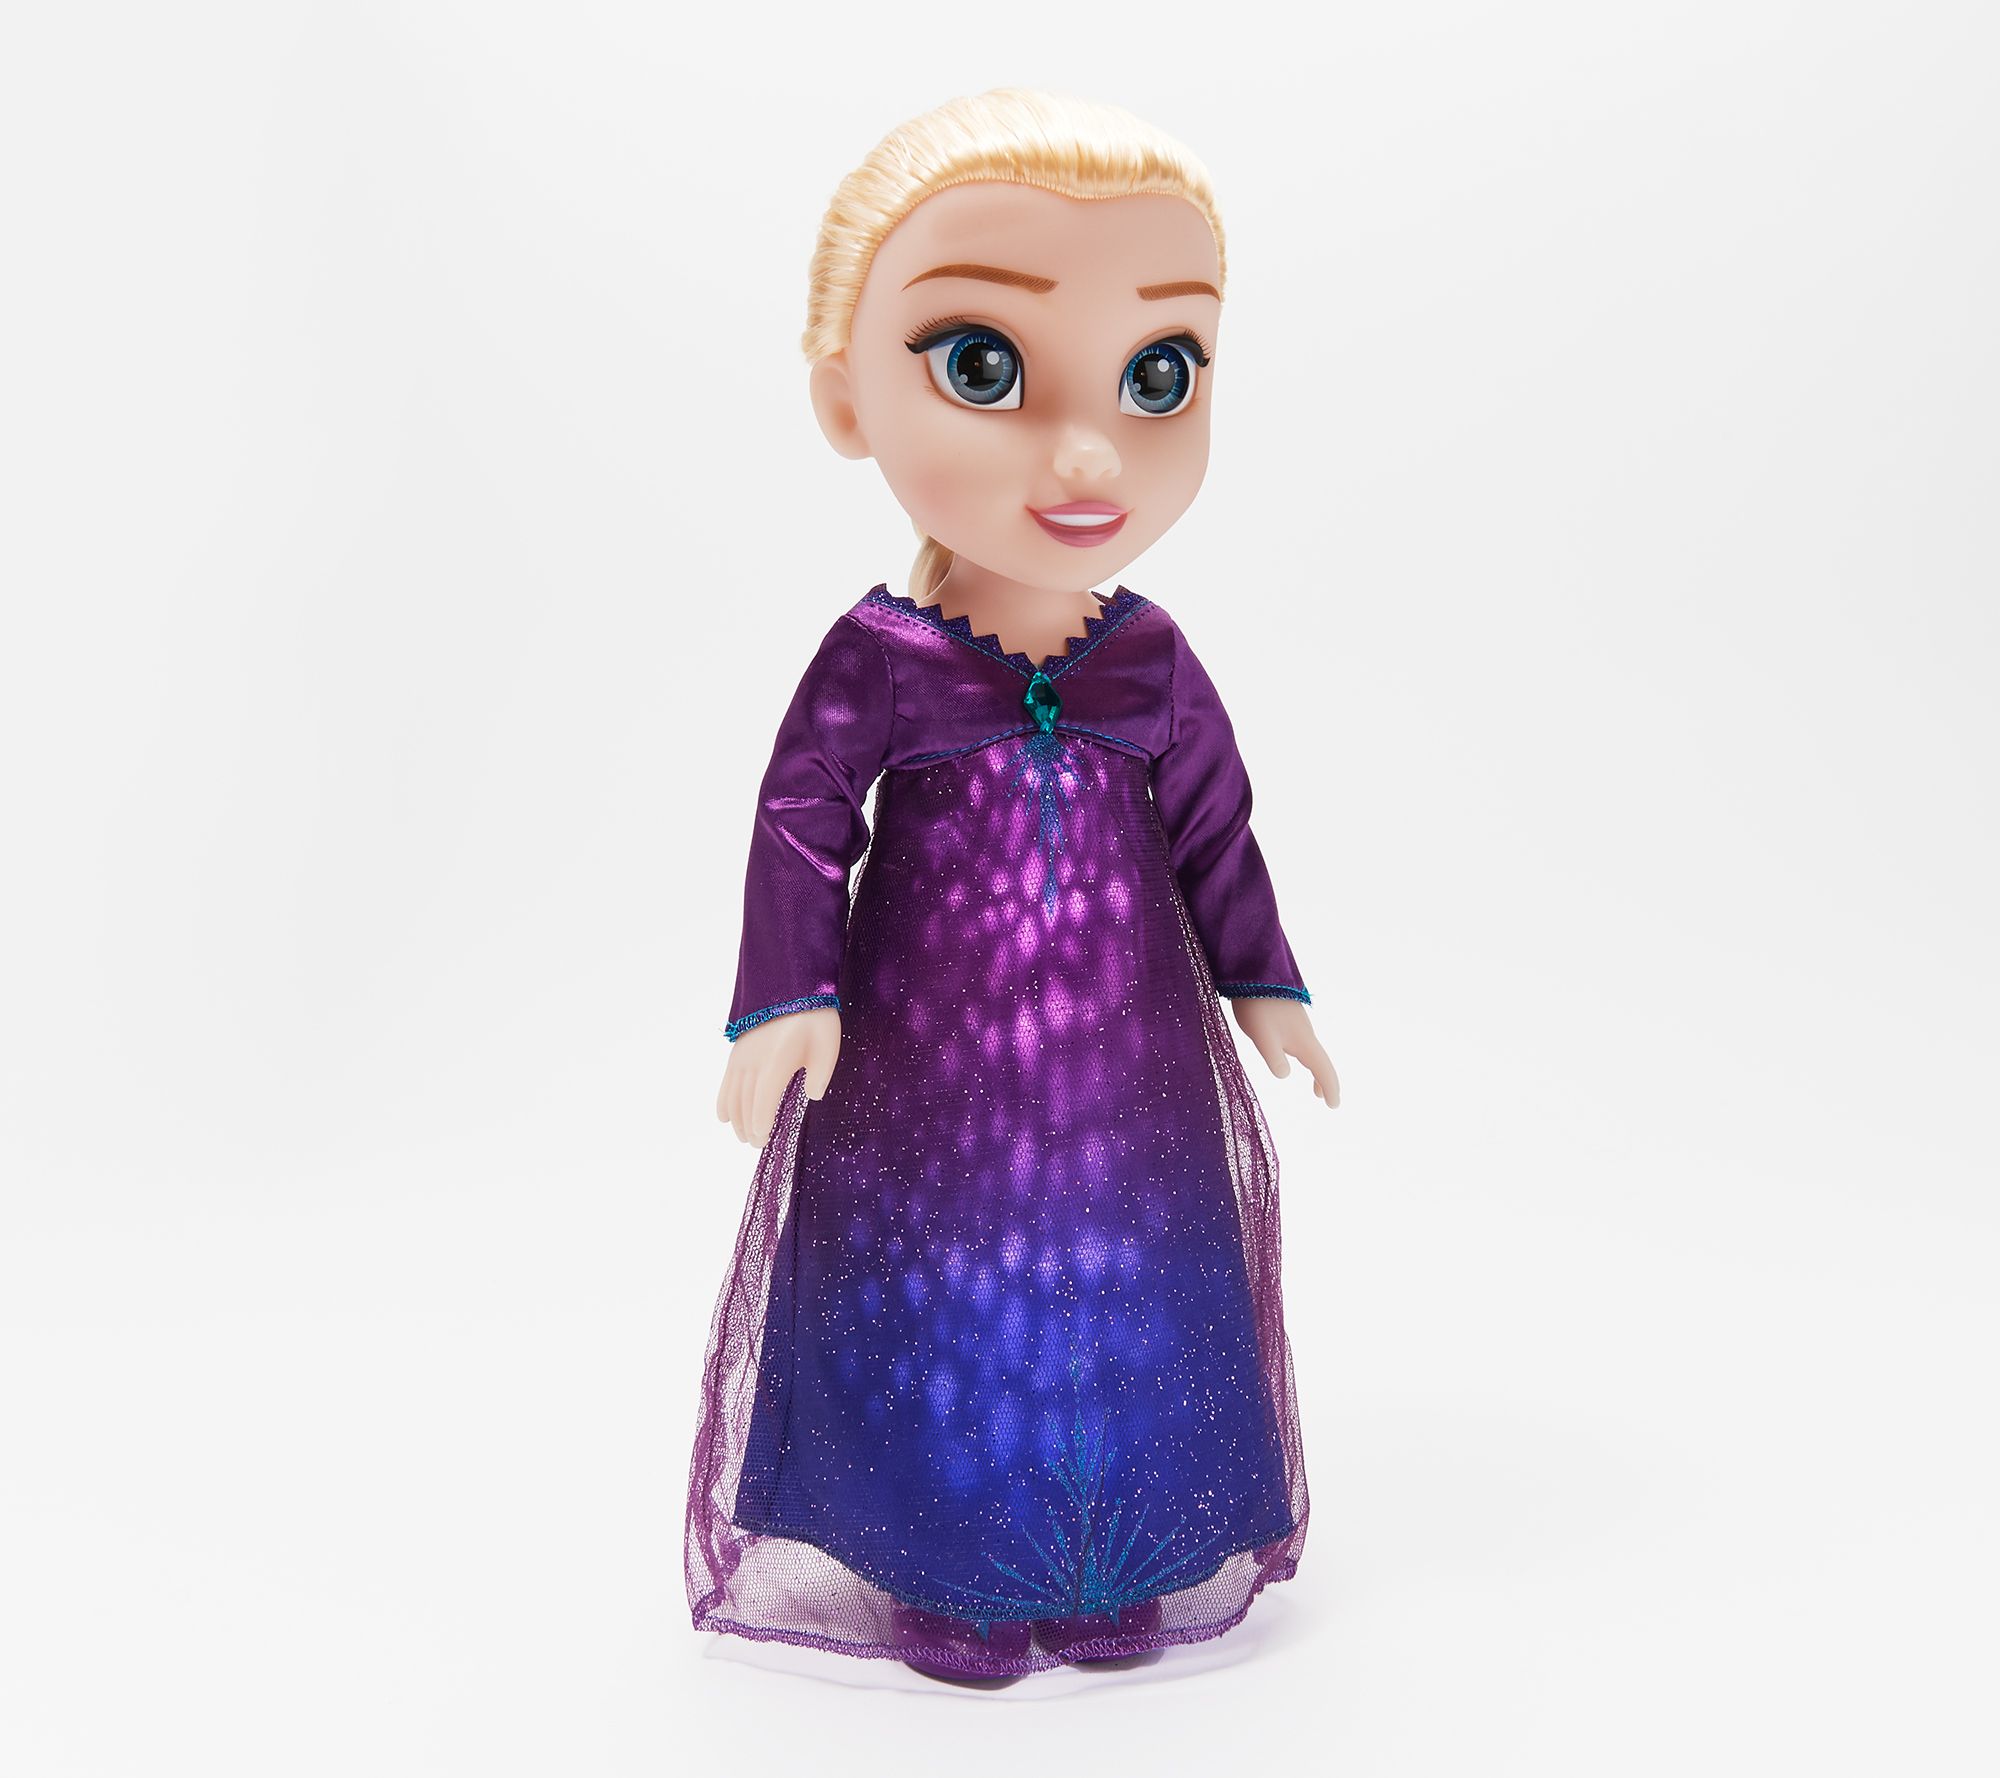 Disney Princess Anna And Elsa 14 Inch Singing Sisters Feature Fashion ...